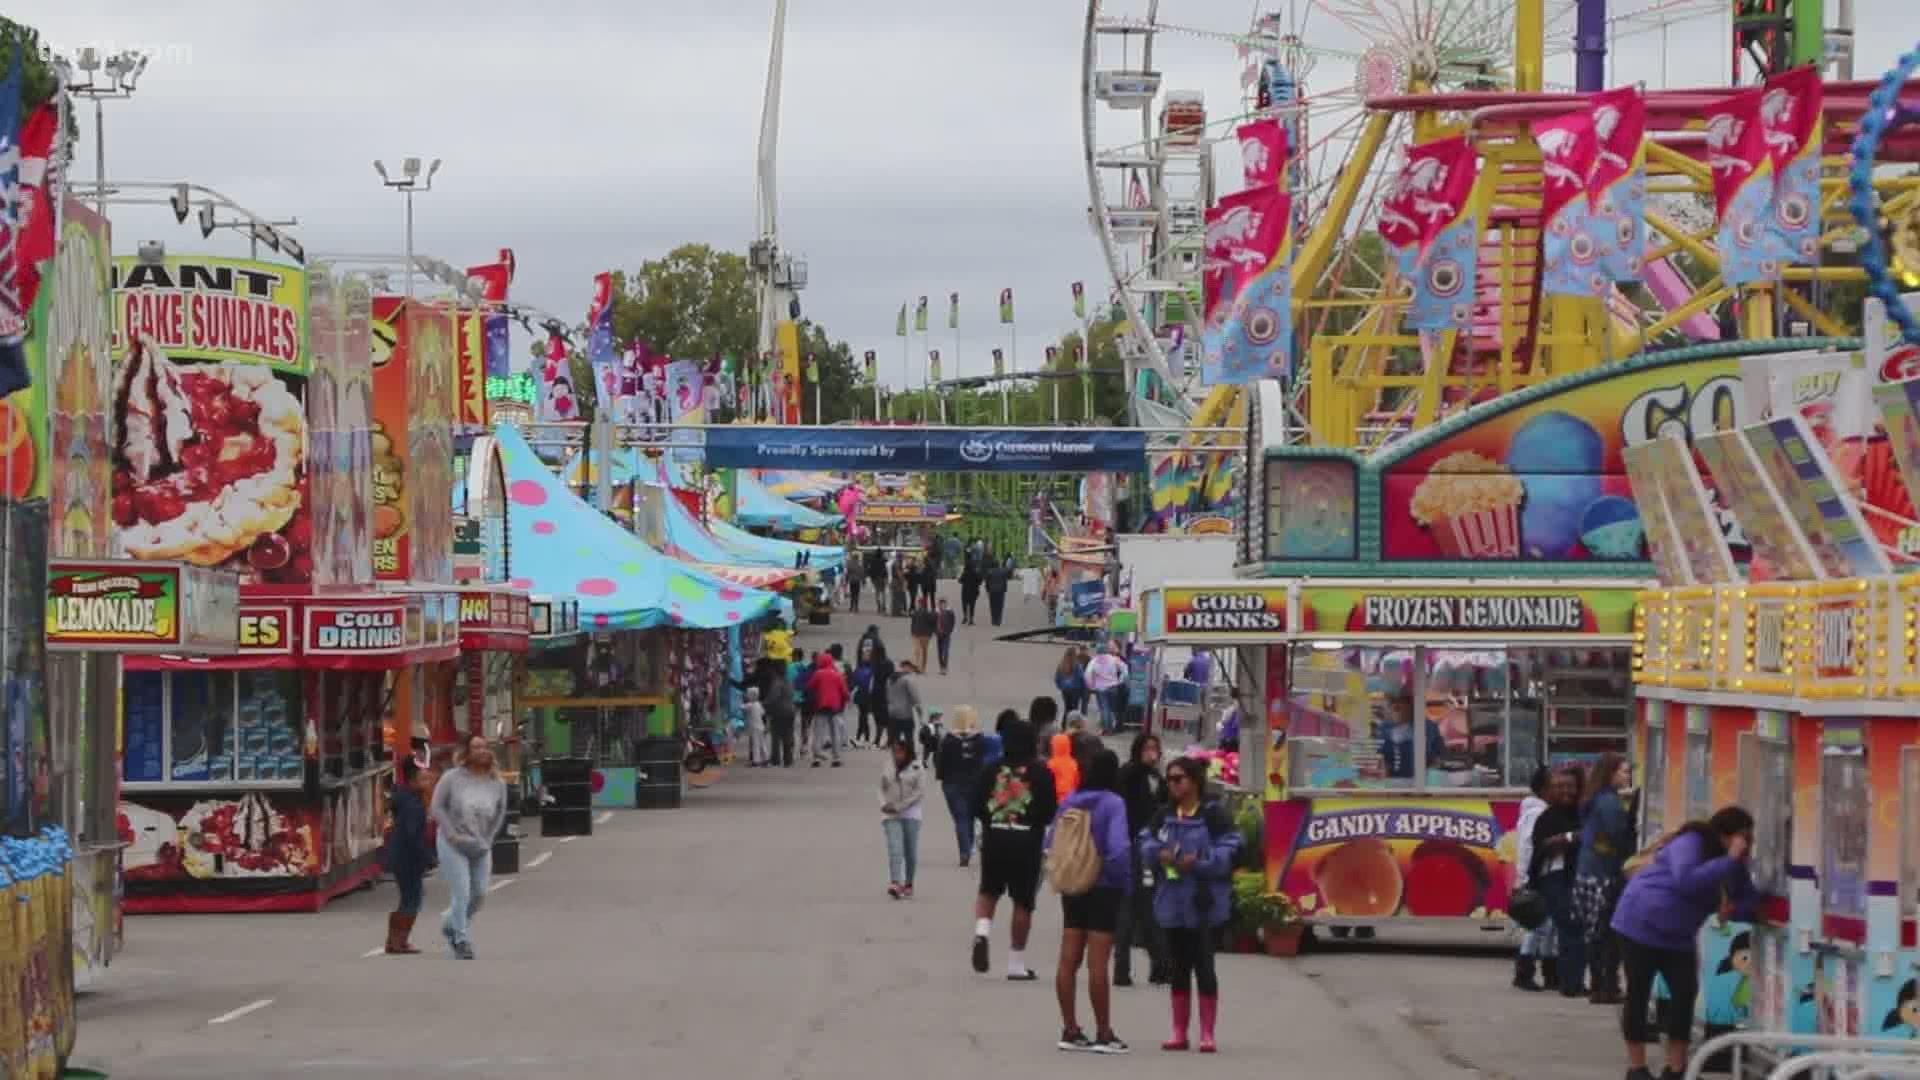 The Arkansas State Fair has been canceled this year due to the COVID-19 pandemic.